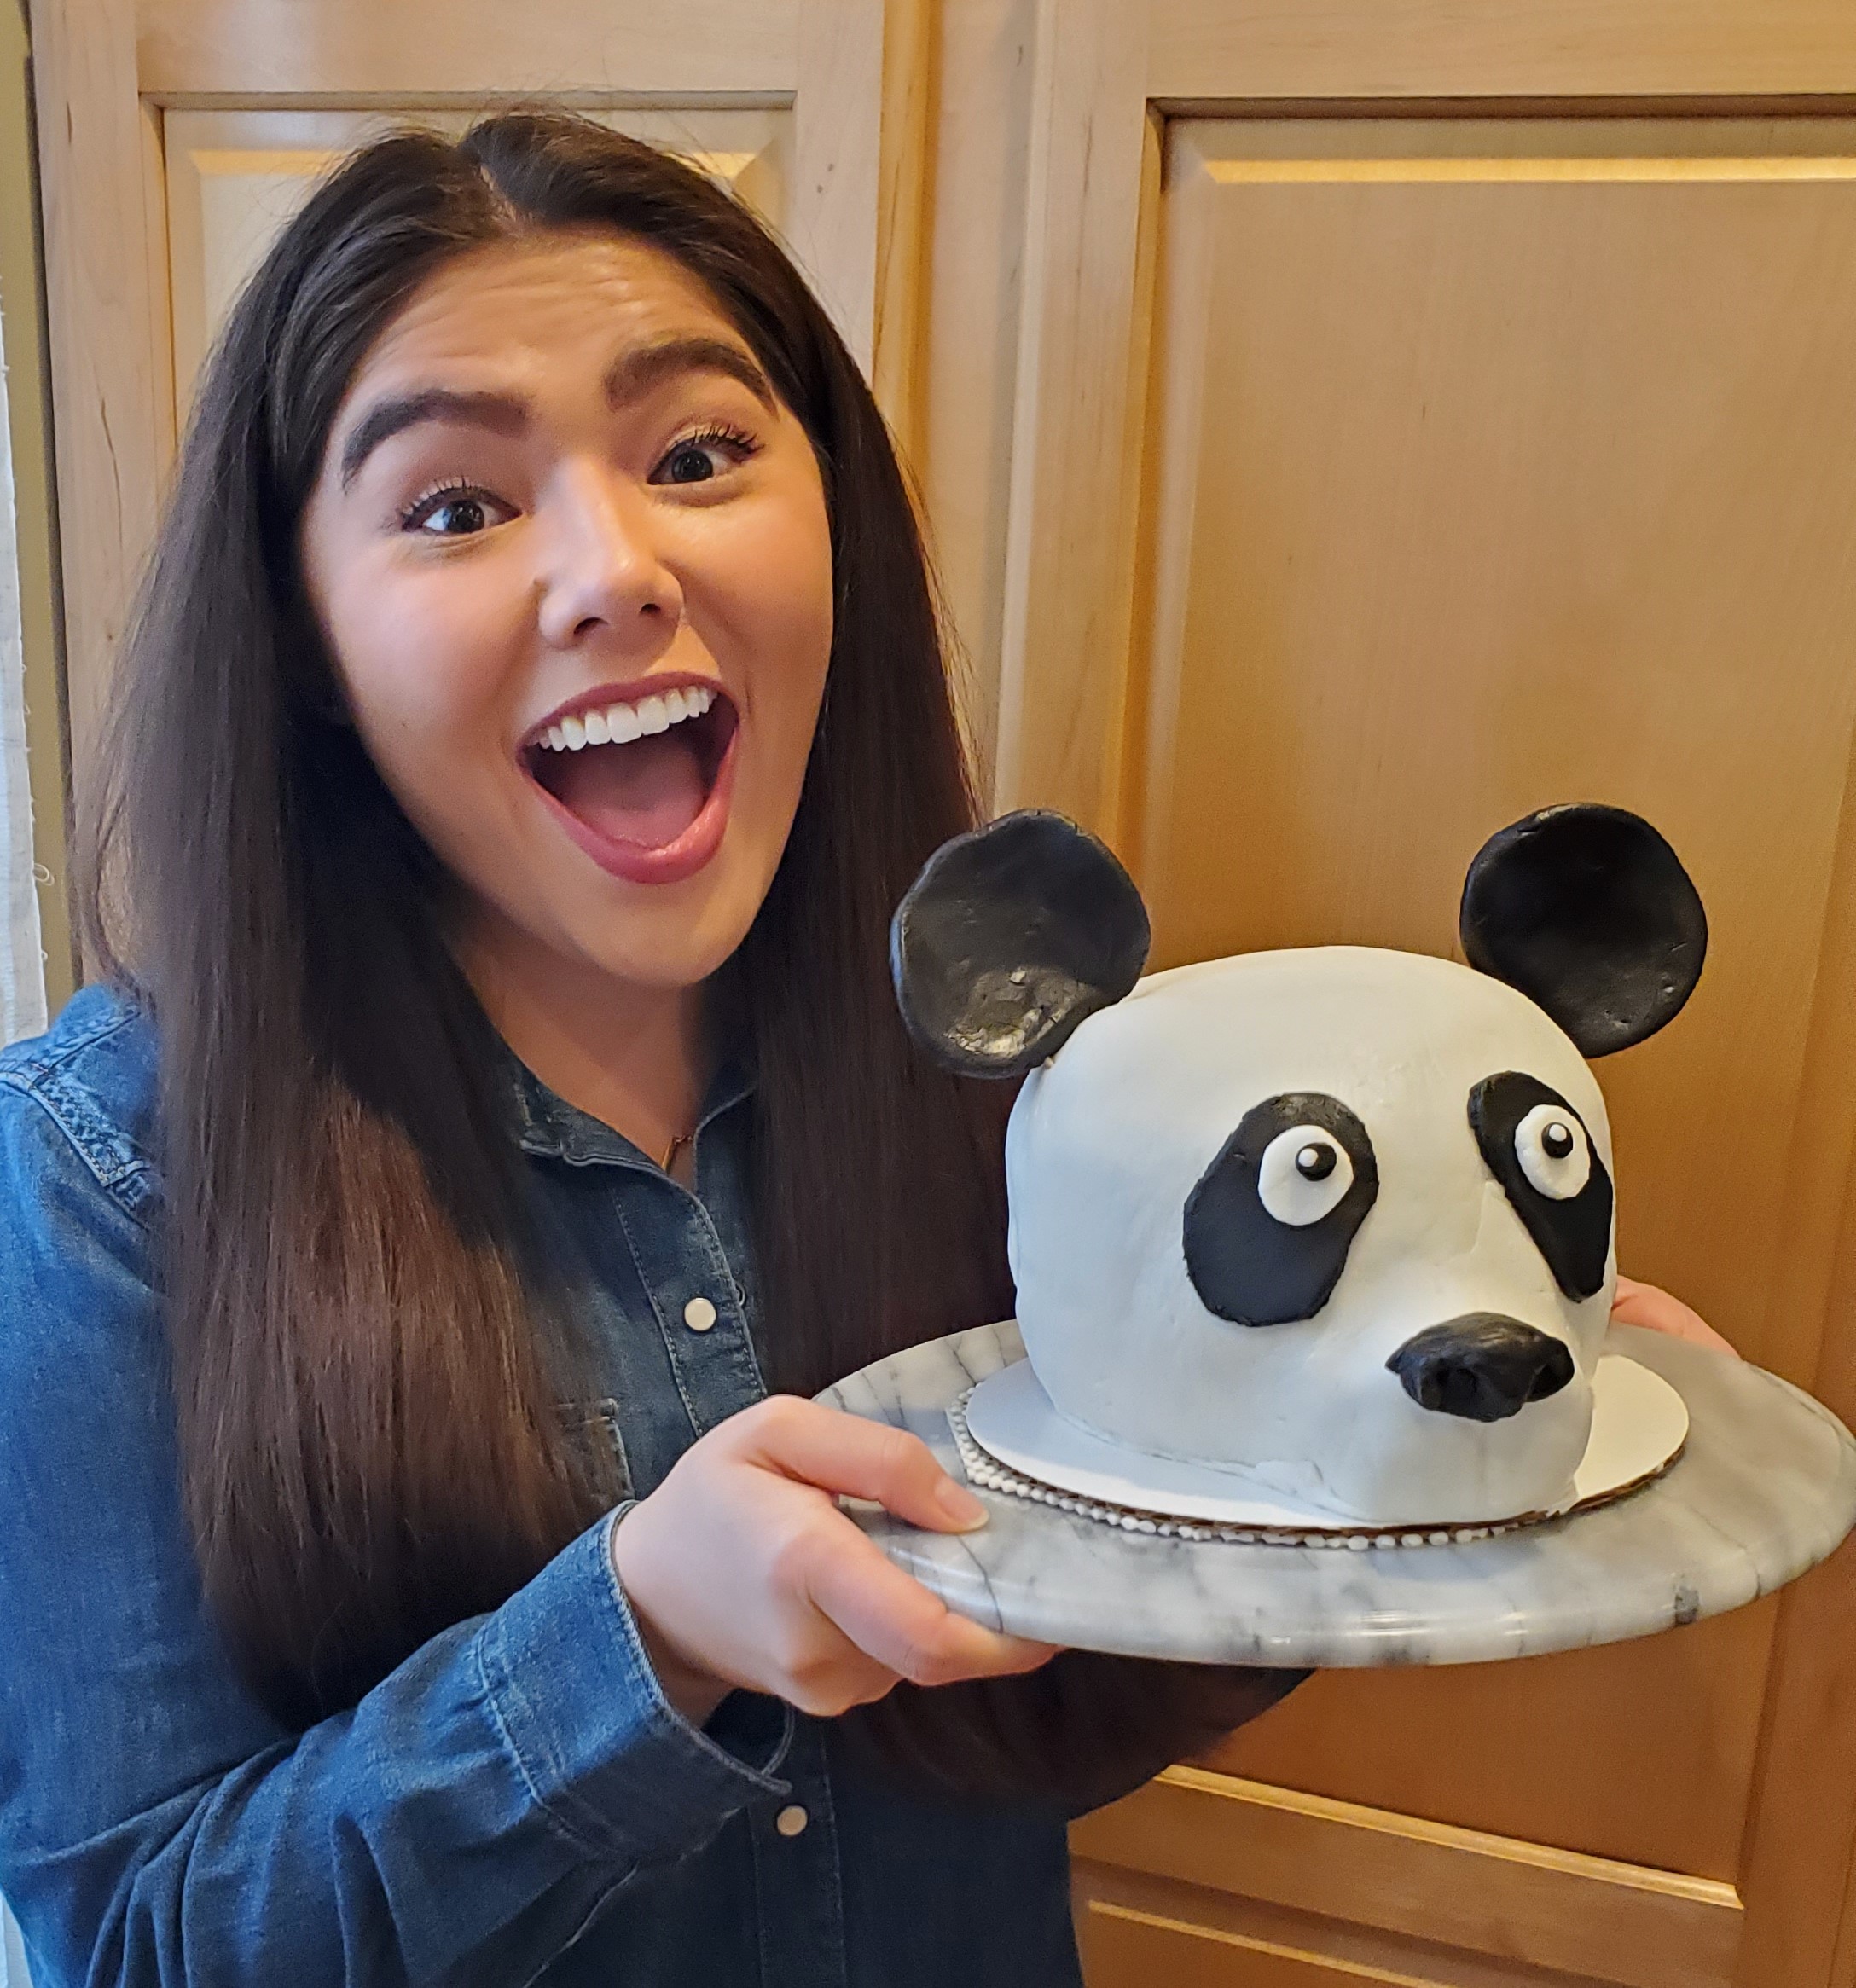 Me holding the panda cake with a "wow" expression. Behind me is a wooden cupboard.